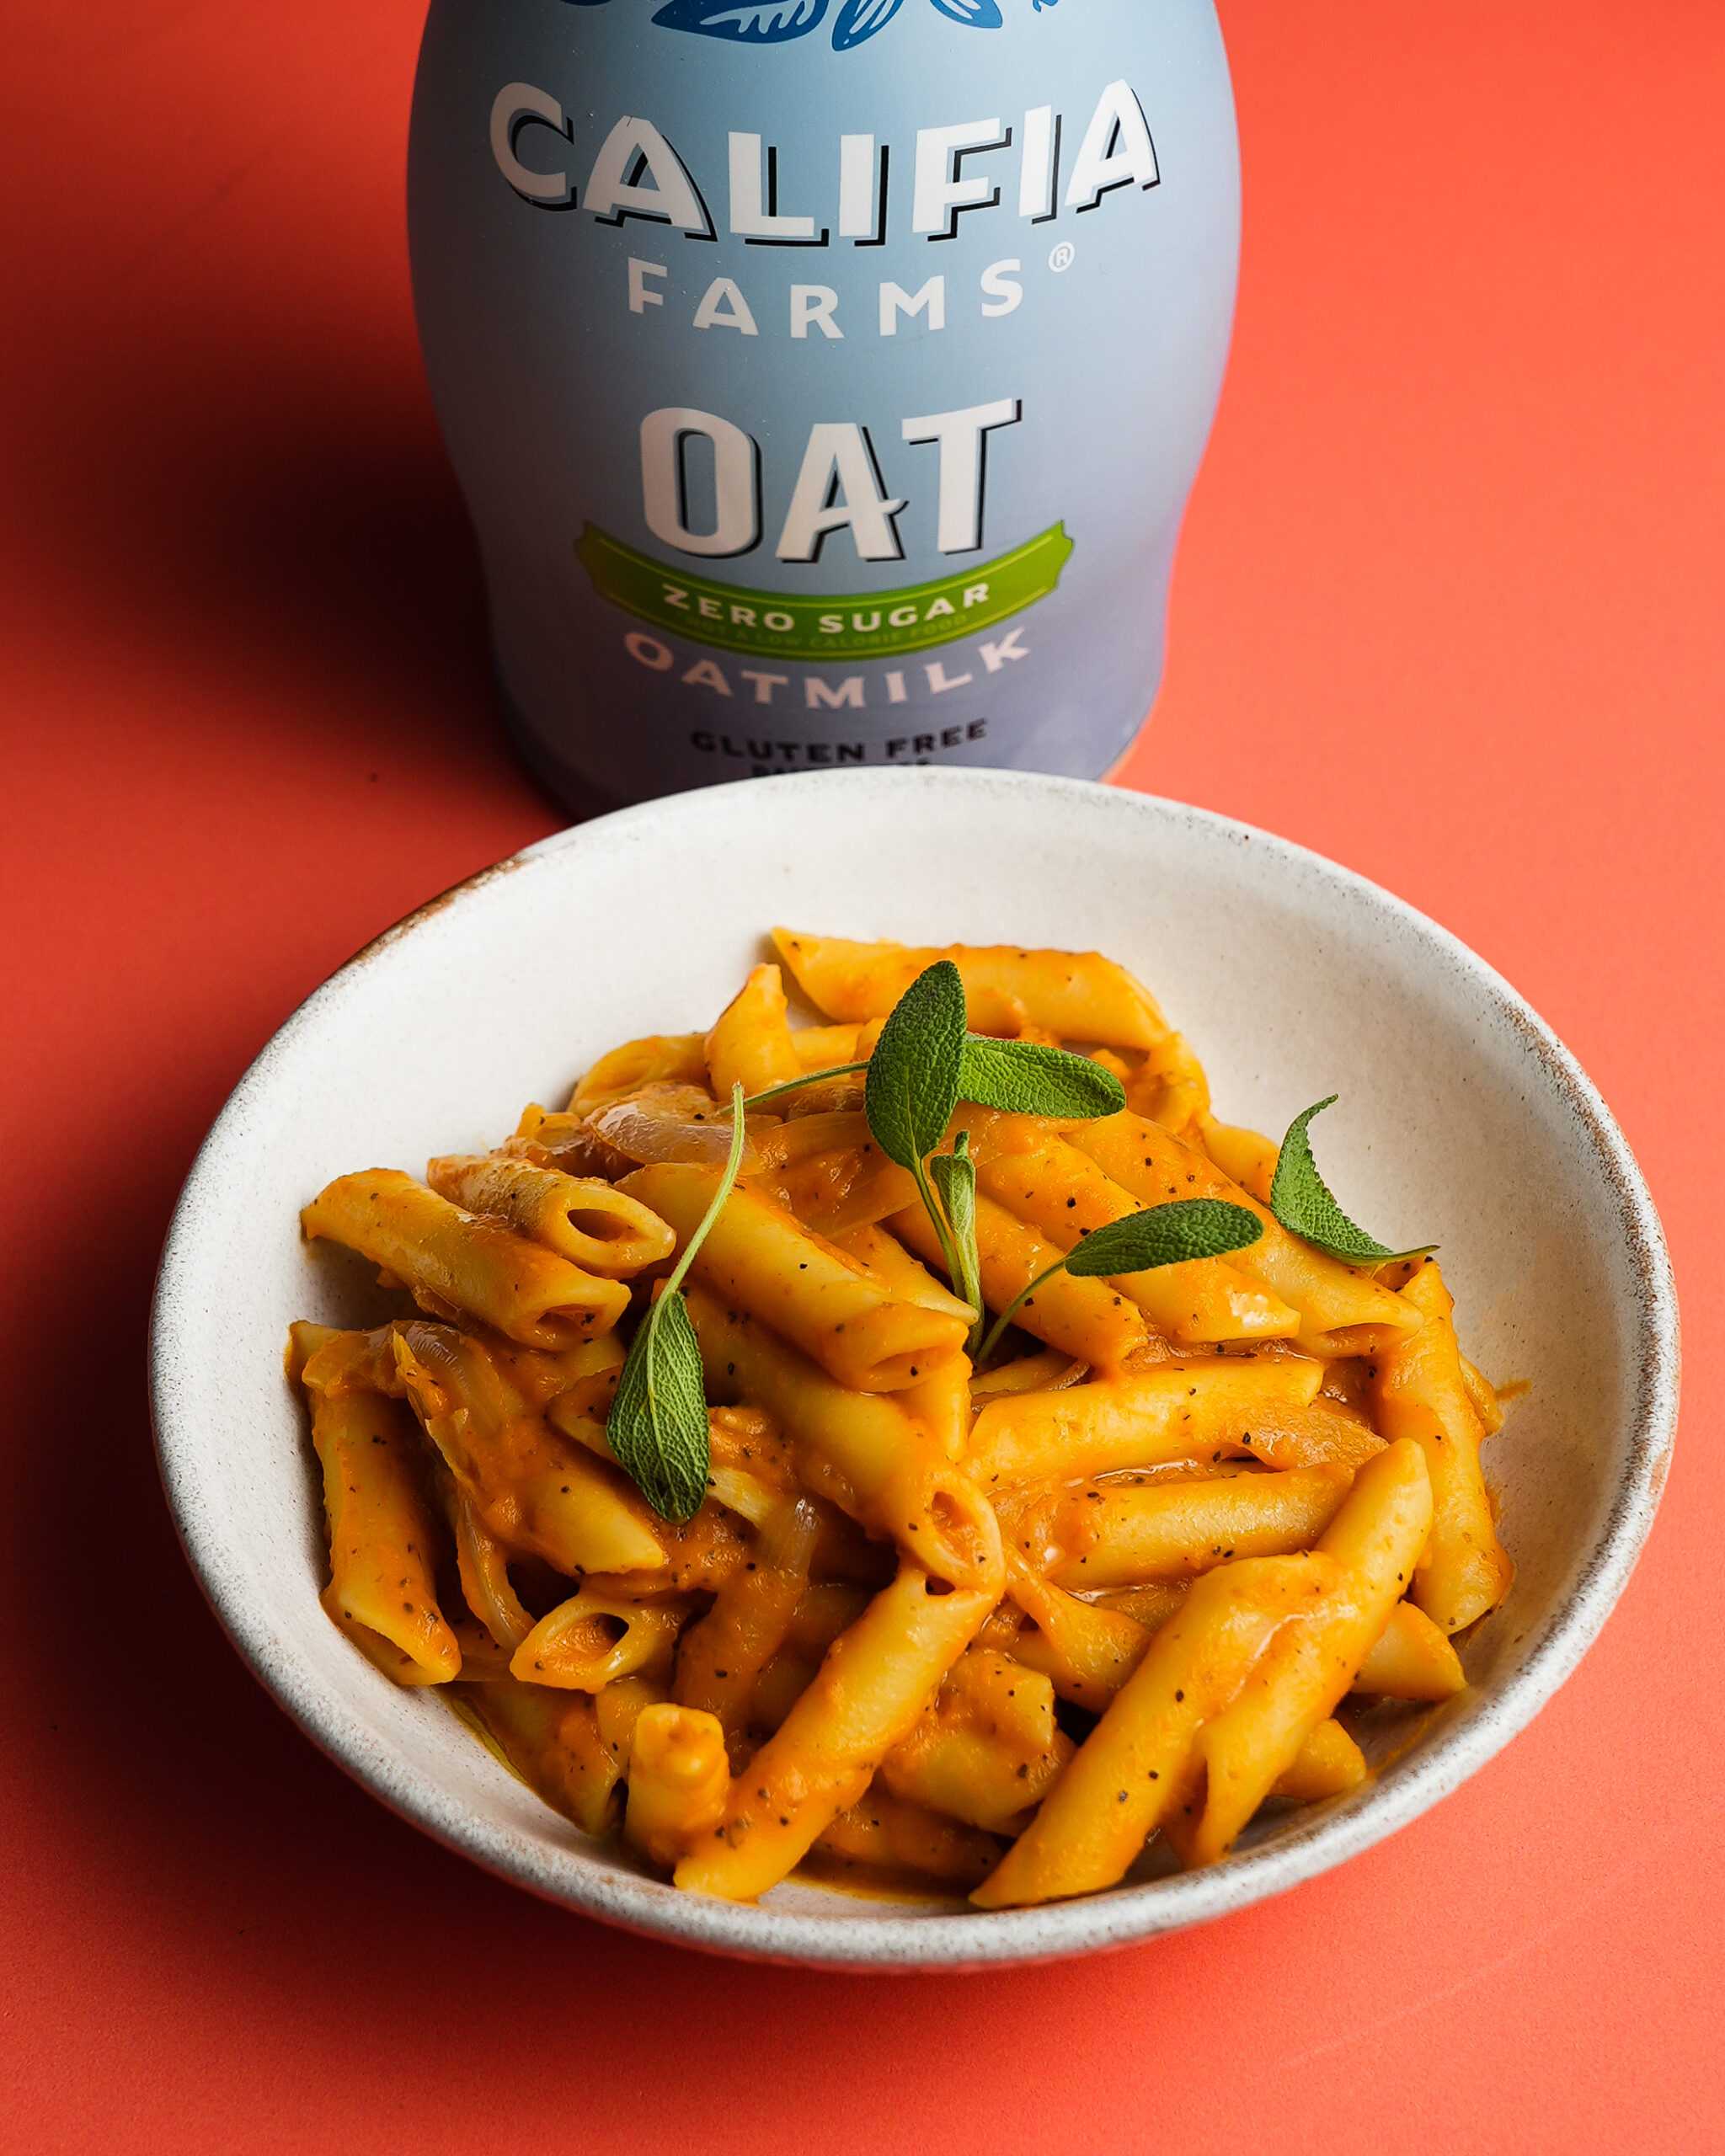 A bowl of pumpkin pasta sits in the foreground of the image, with Califia Farms Zero Sugar Oatmilk behind.